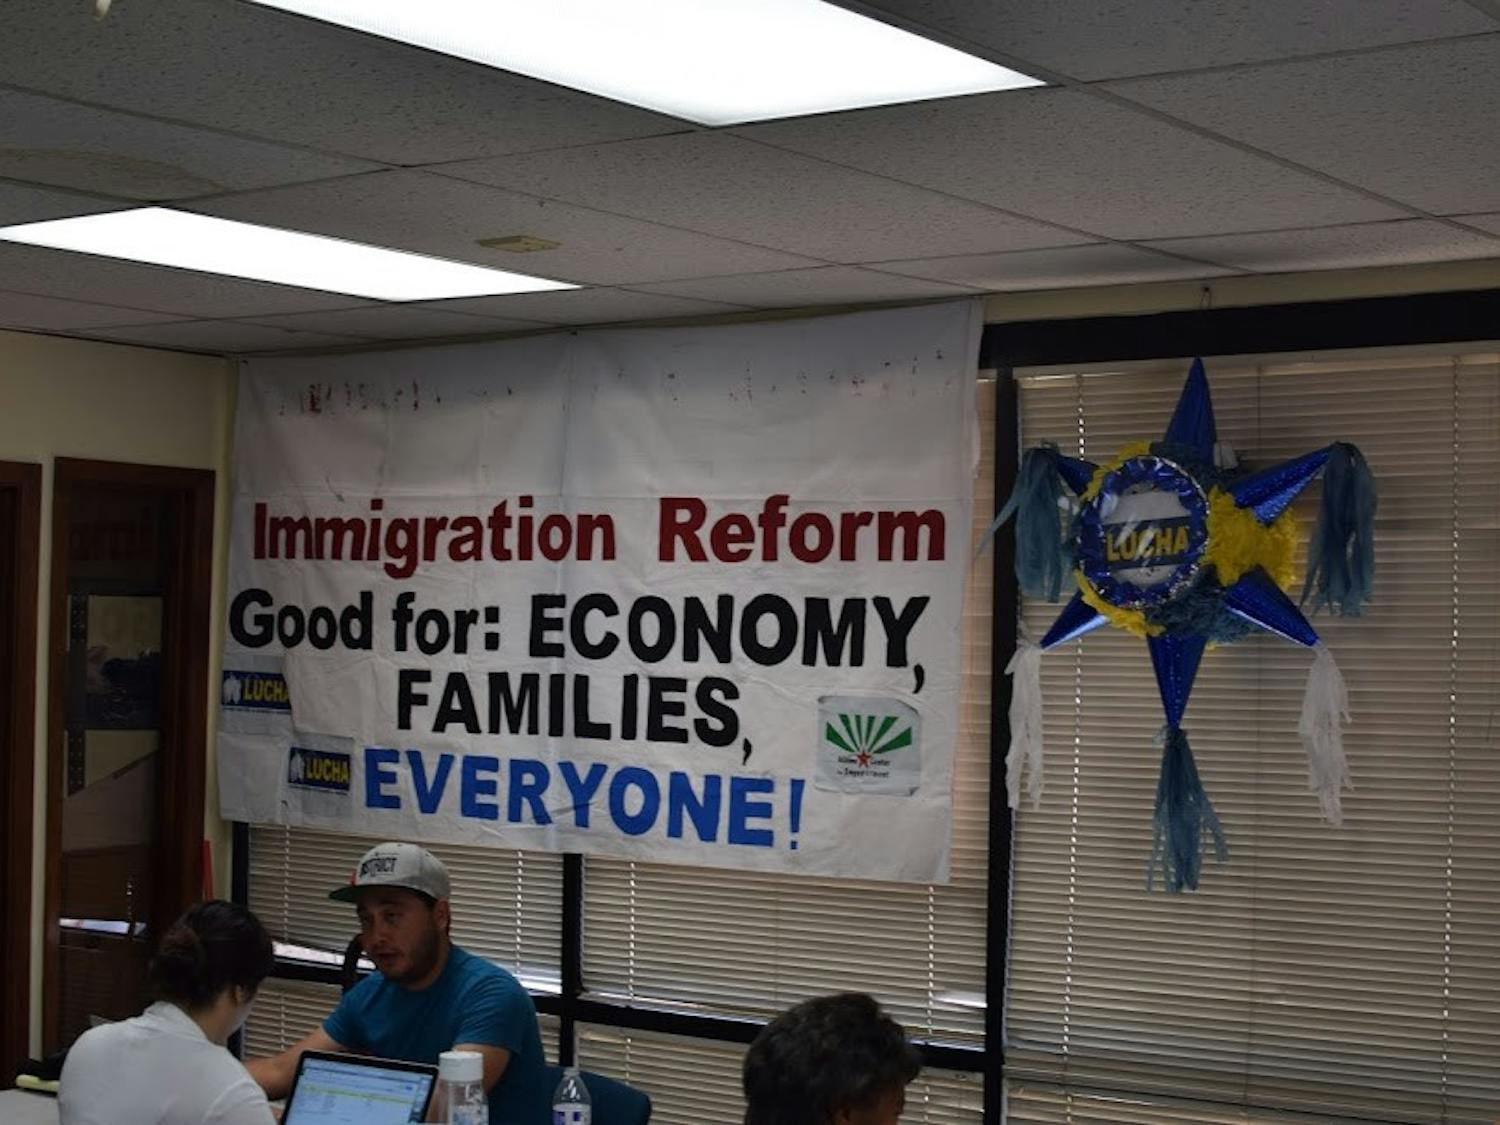 A&nbsp;sign reads "Immigration Reform Good for: Economy, Families, everyone" inside the LUCHA minimum wage campaign room.&nbsp;